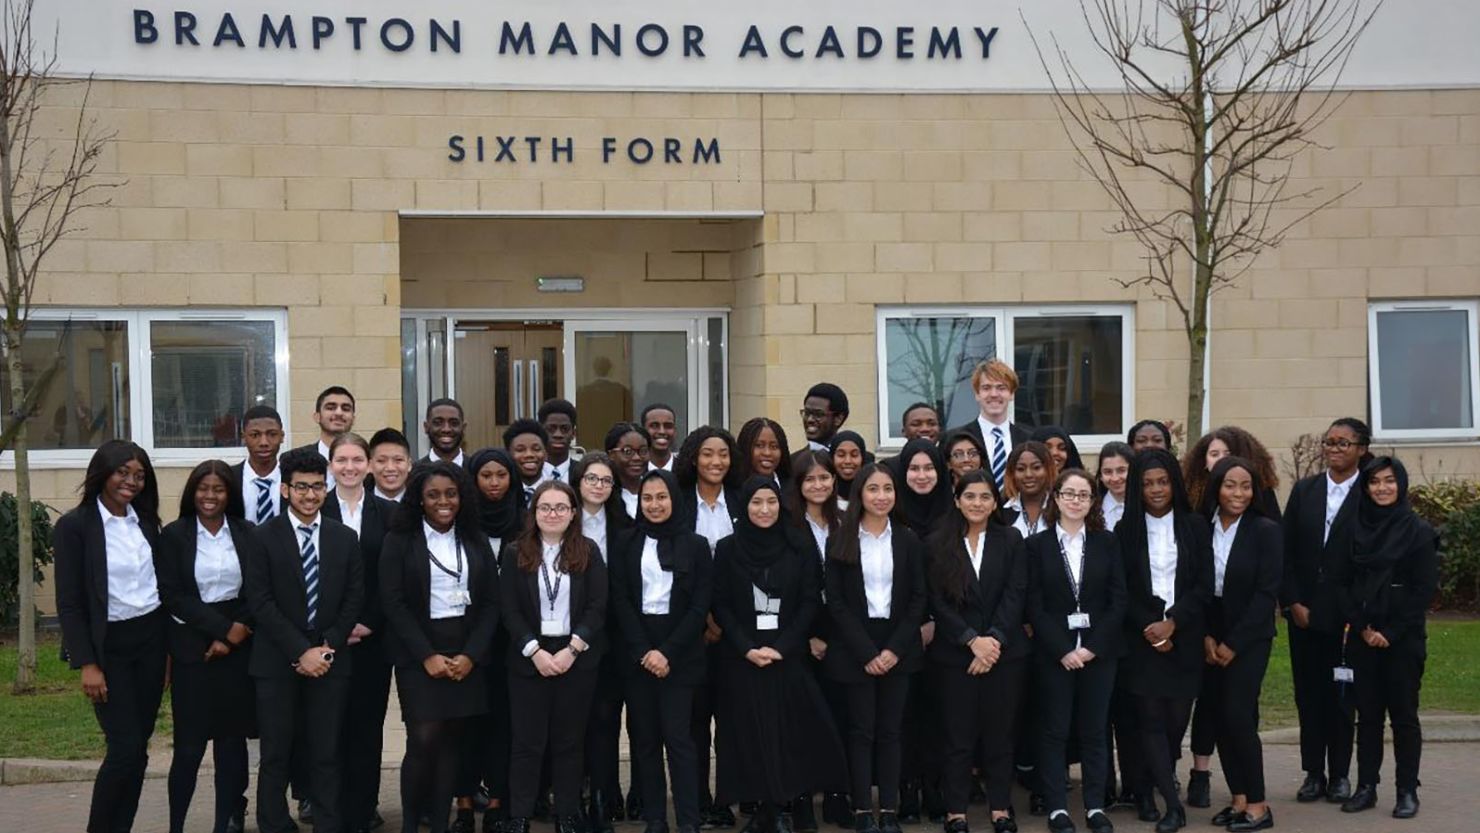 41 students from state school Brampton Manor Academy have offers to study at Oxford and Cambridge Universities